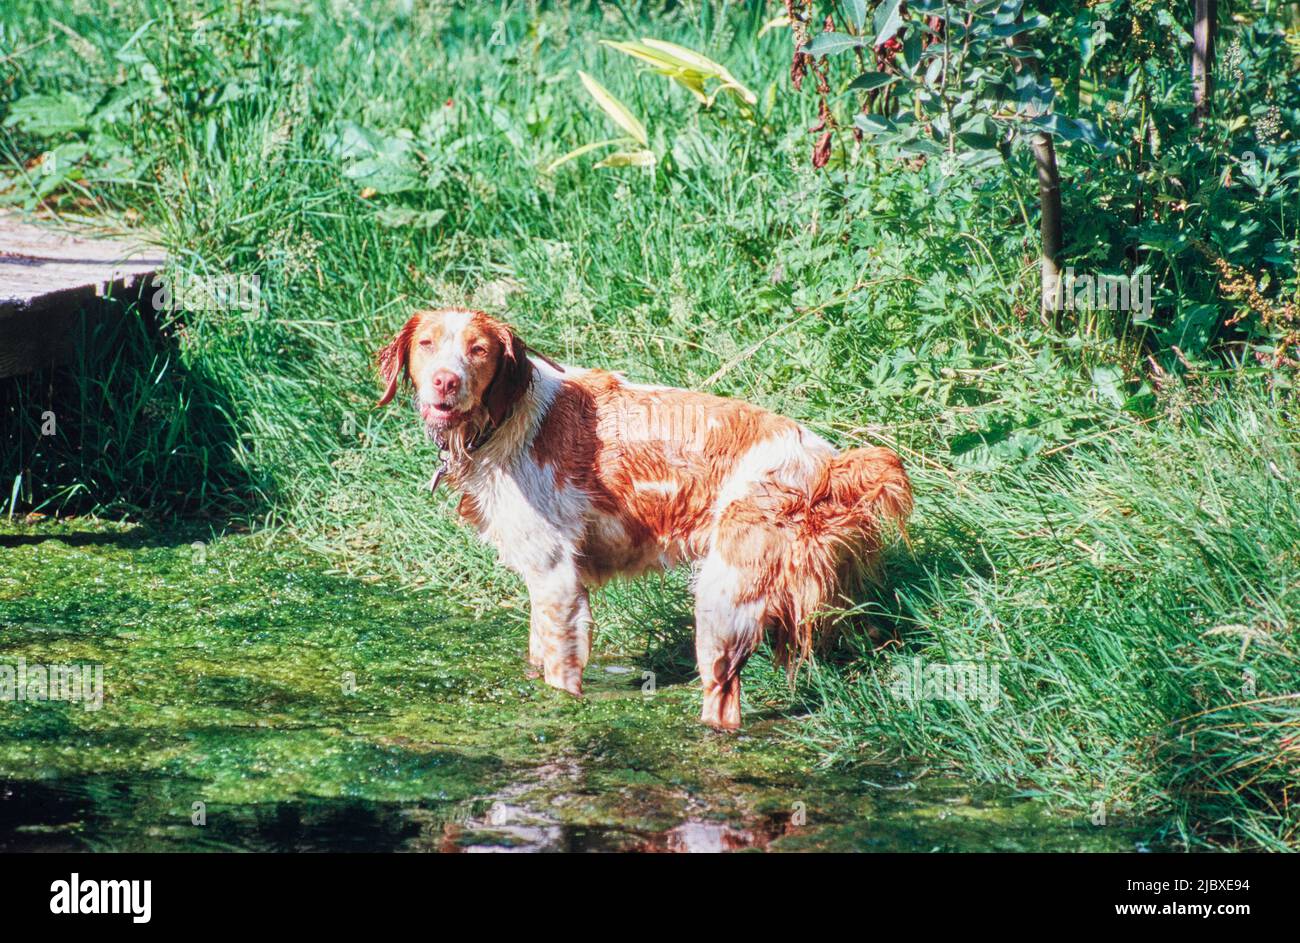 A Brittany dog wading into algae covered water Stock Photo